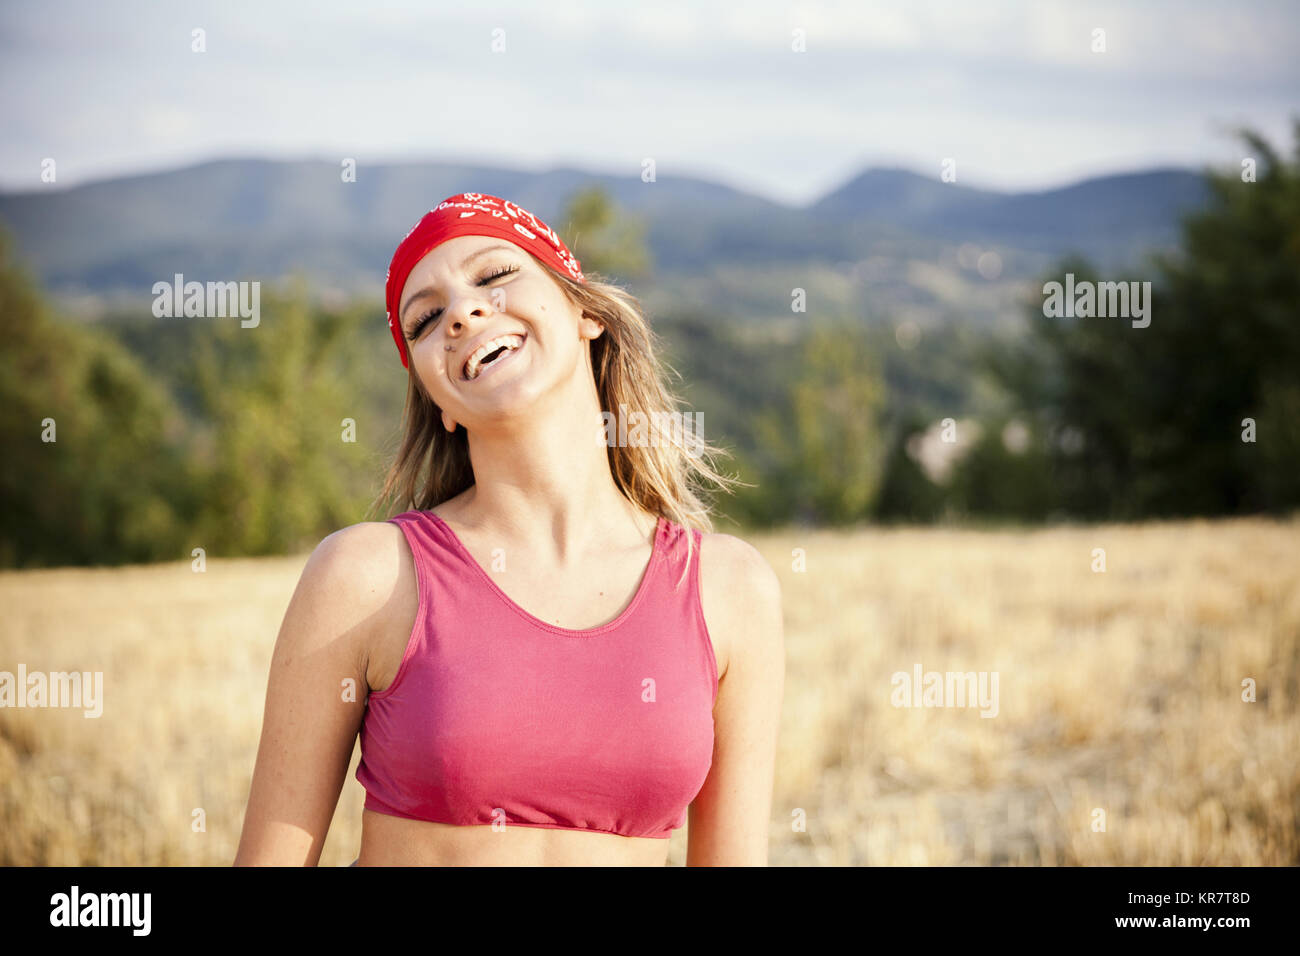 young beautiful woman exercise in nature Stock Photo